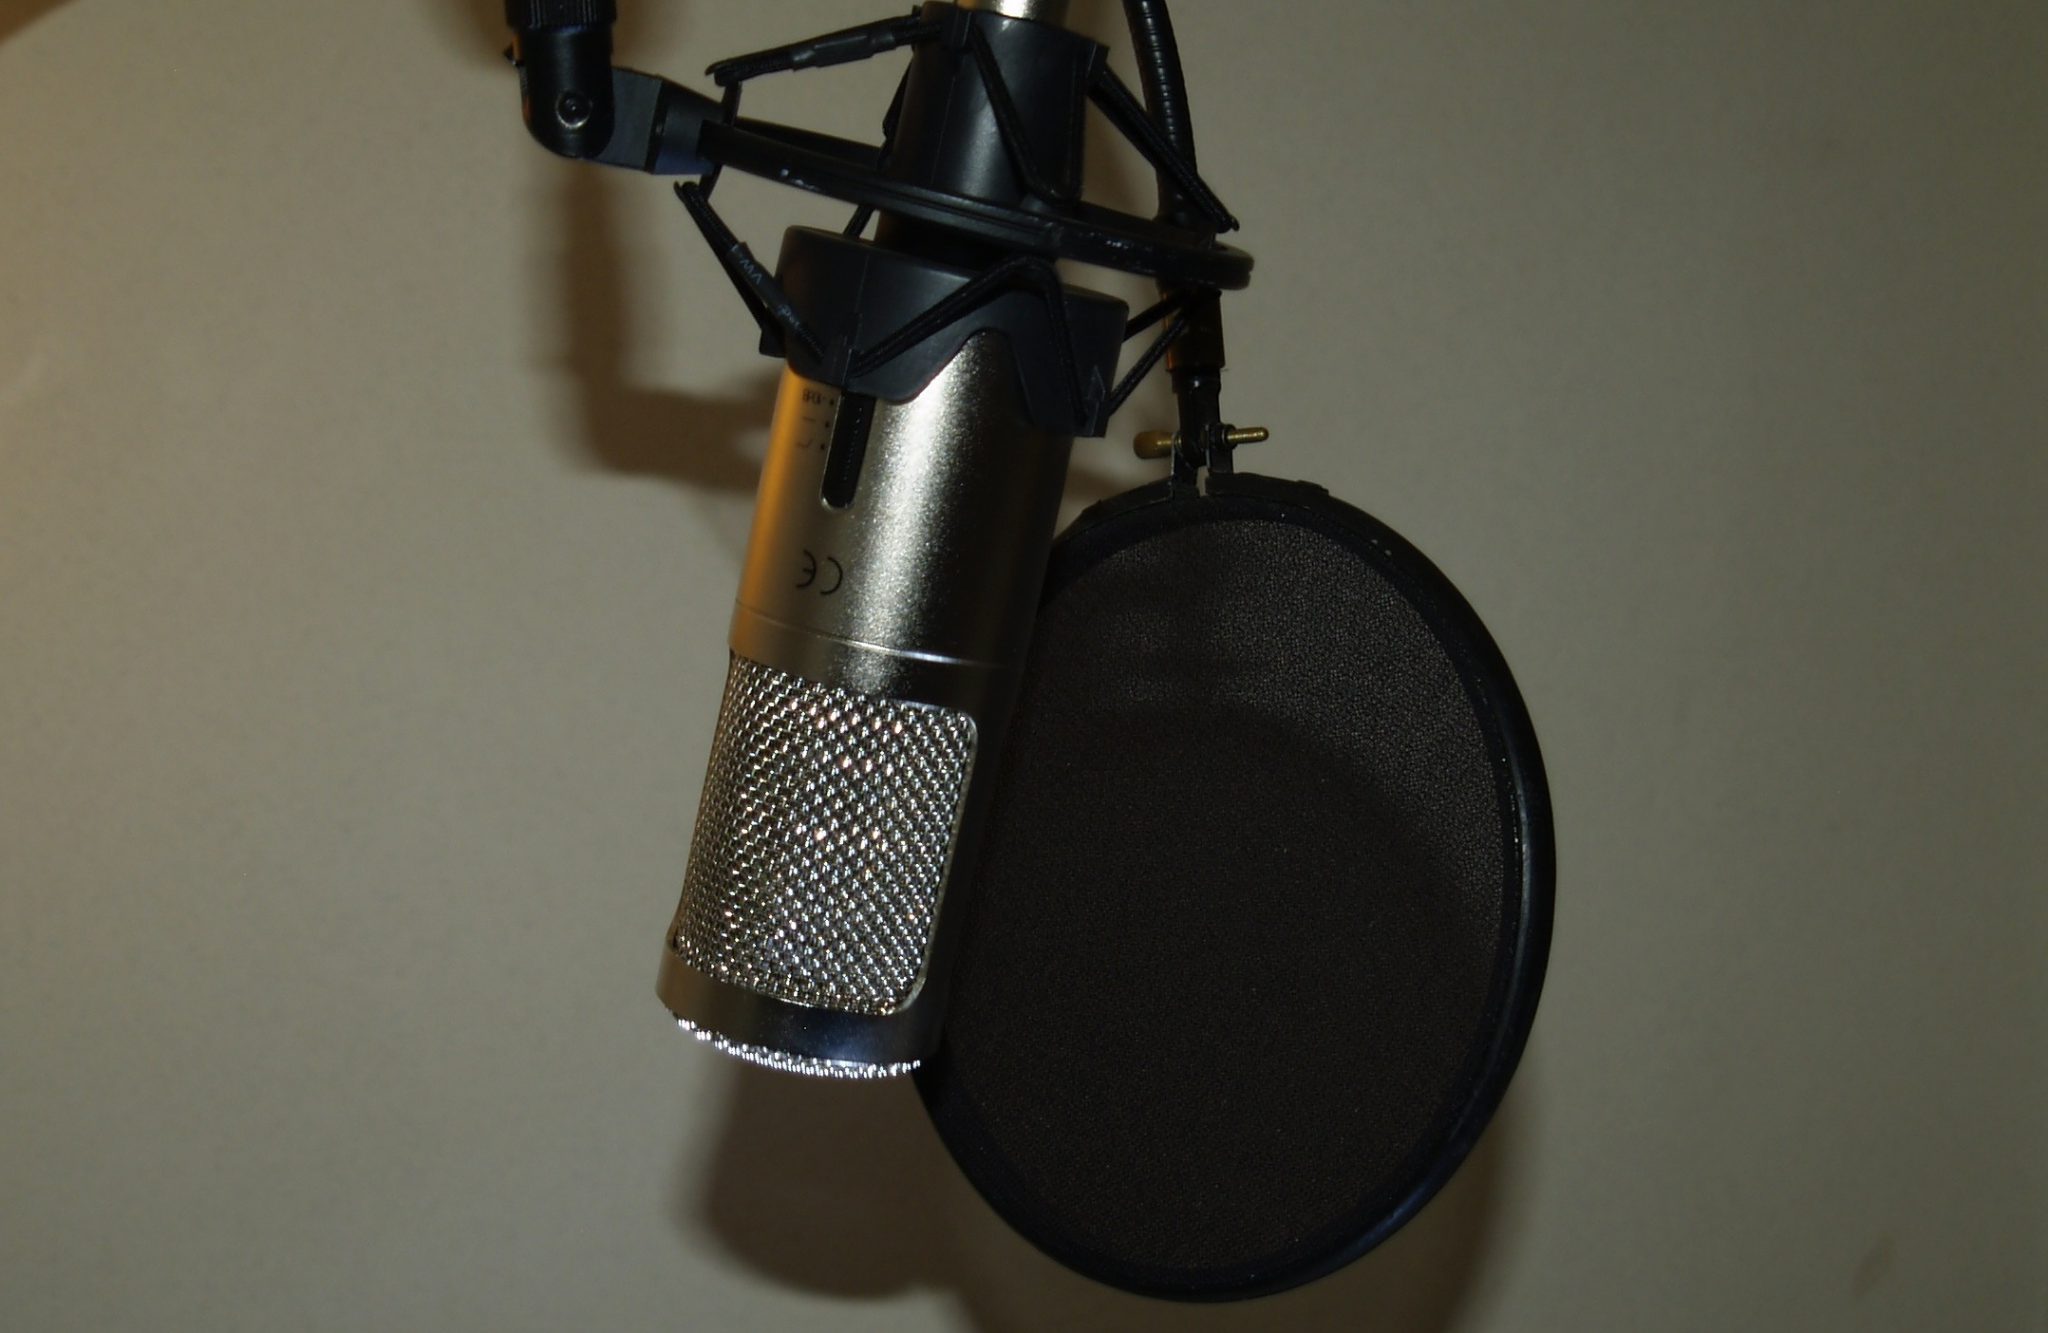 Why use a pop filter